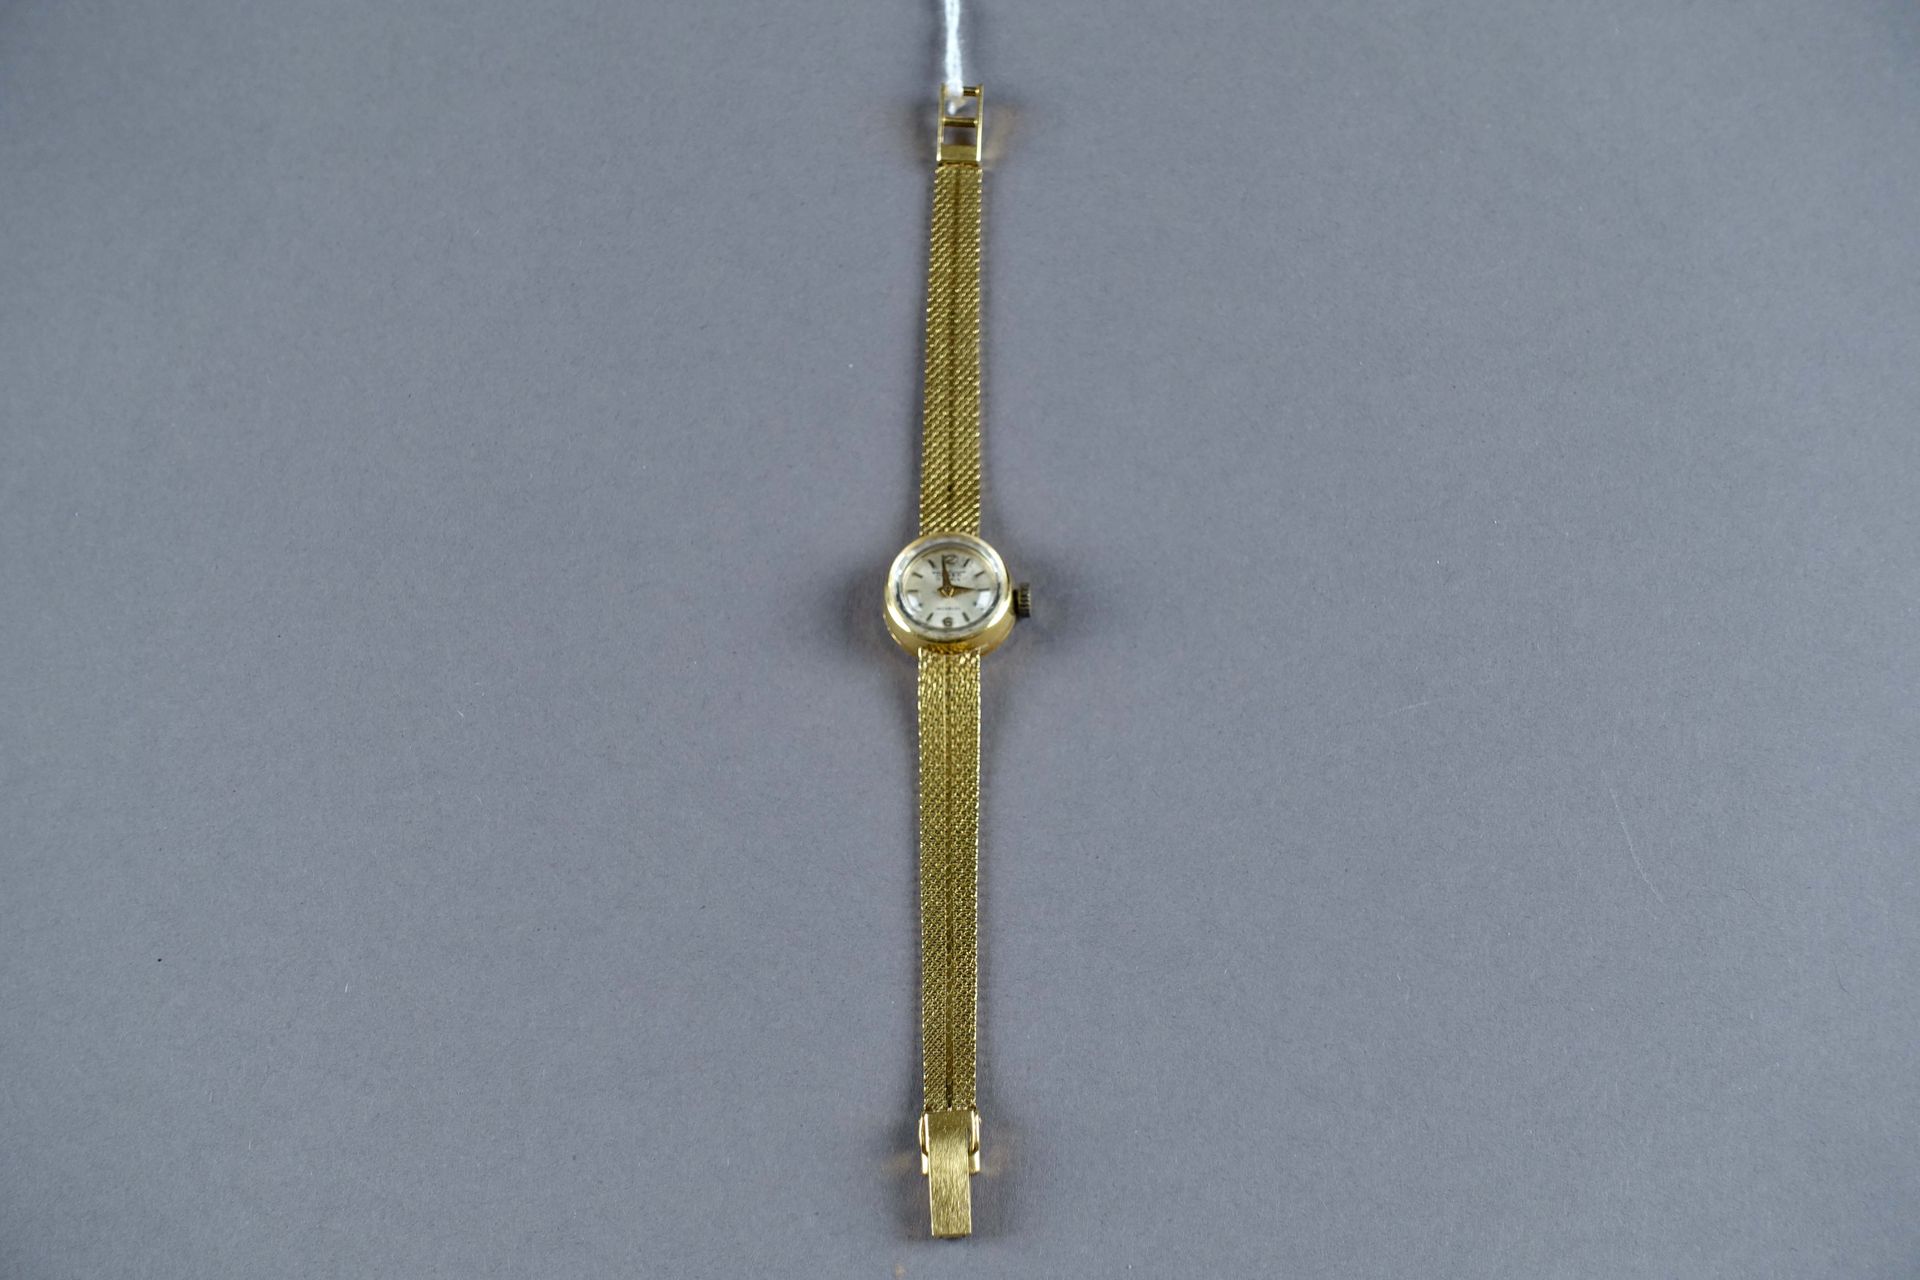 Onger - Suisse. Complete lady's watch. Round bezel. Manual movement with sevente&hellip;